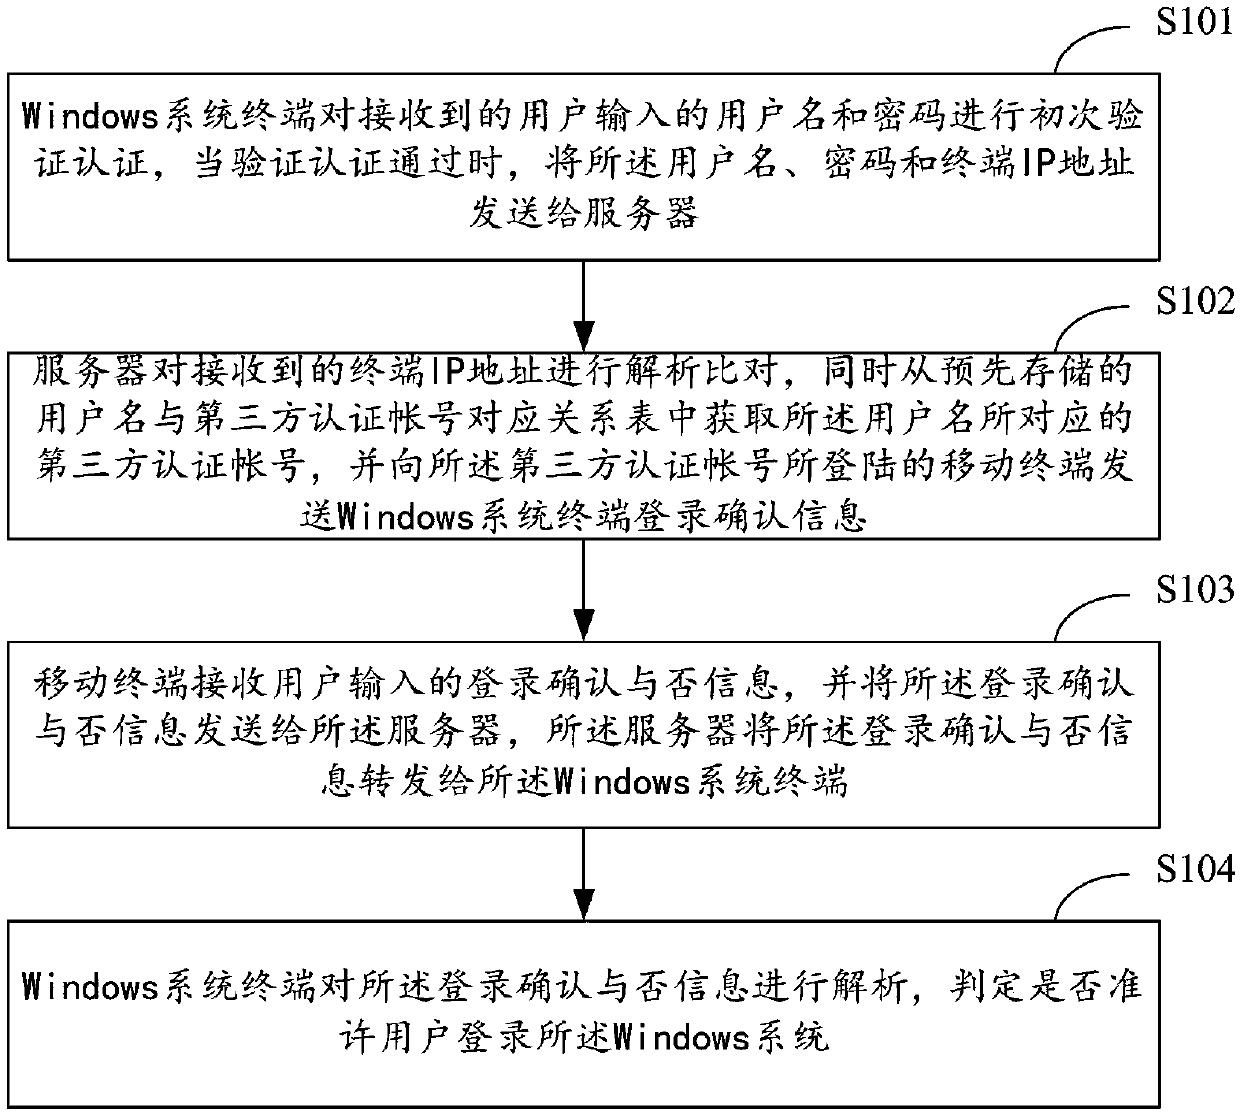 Windows system login authentication method and system